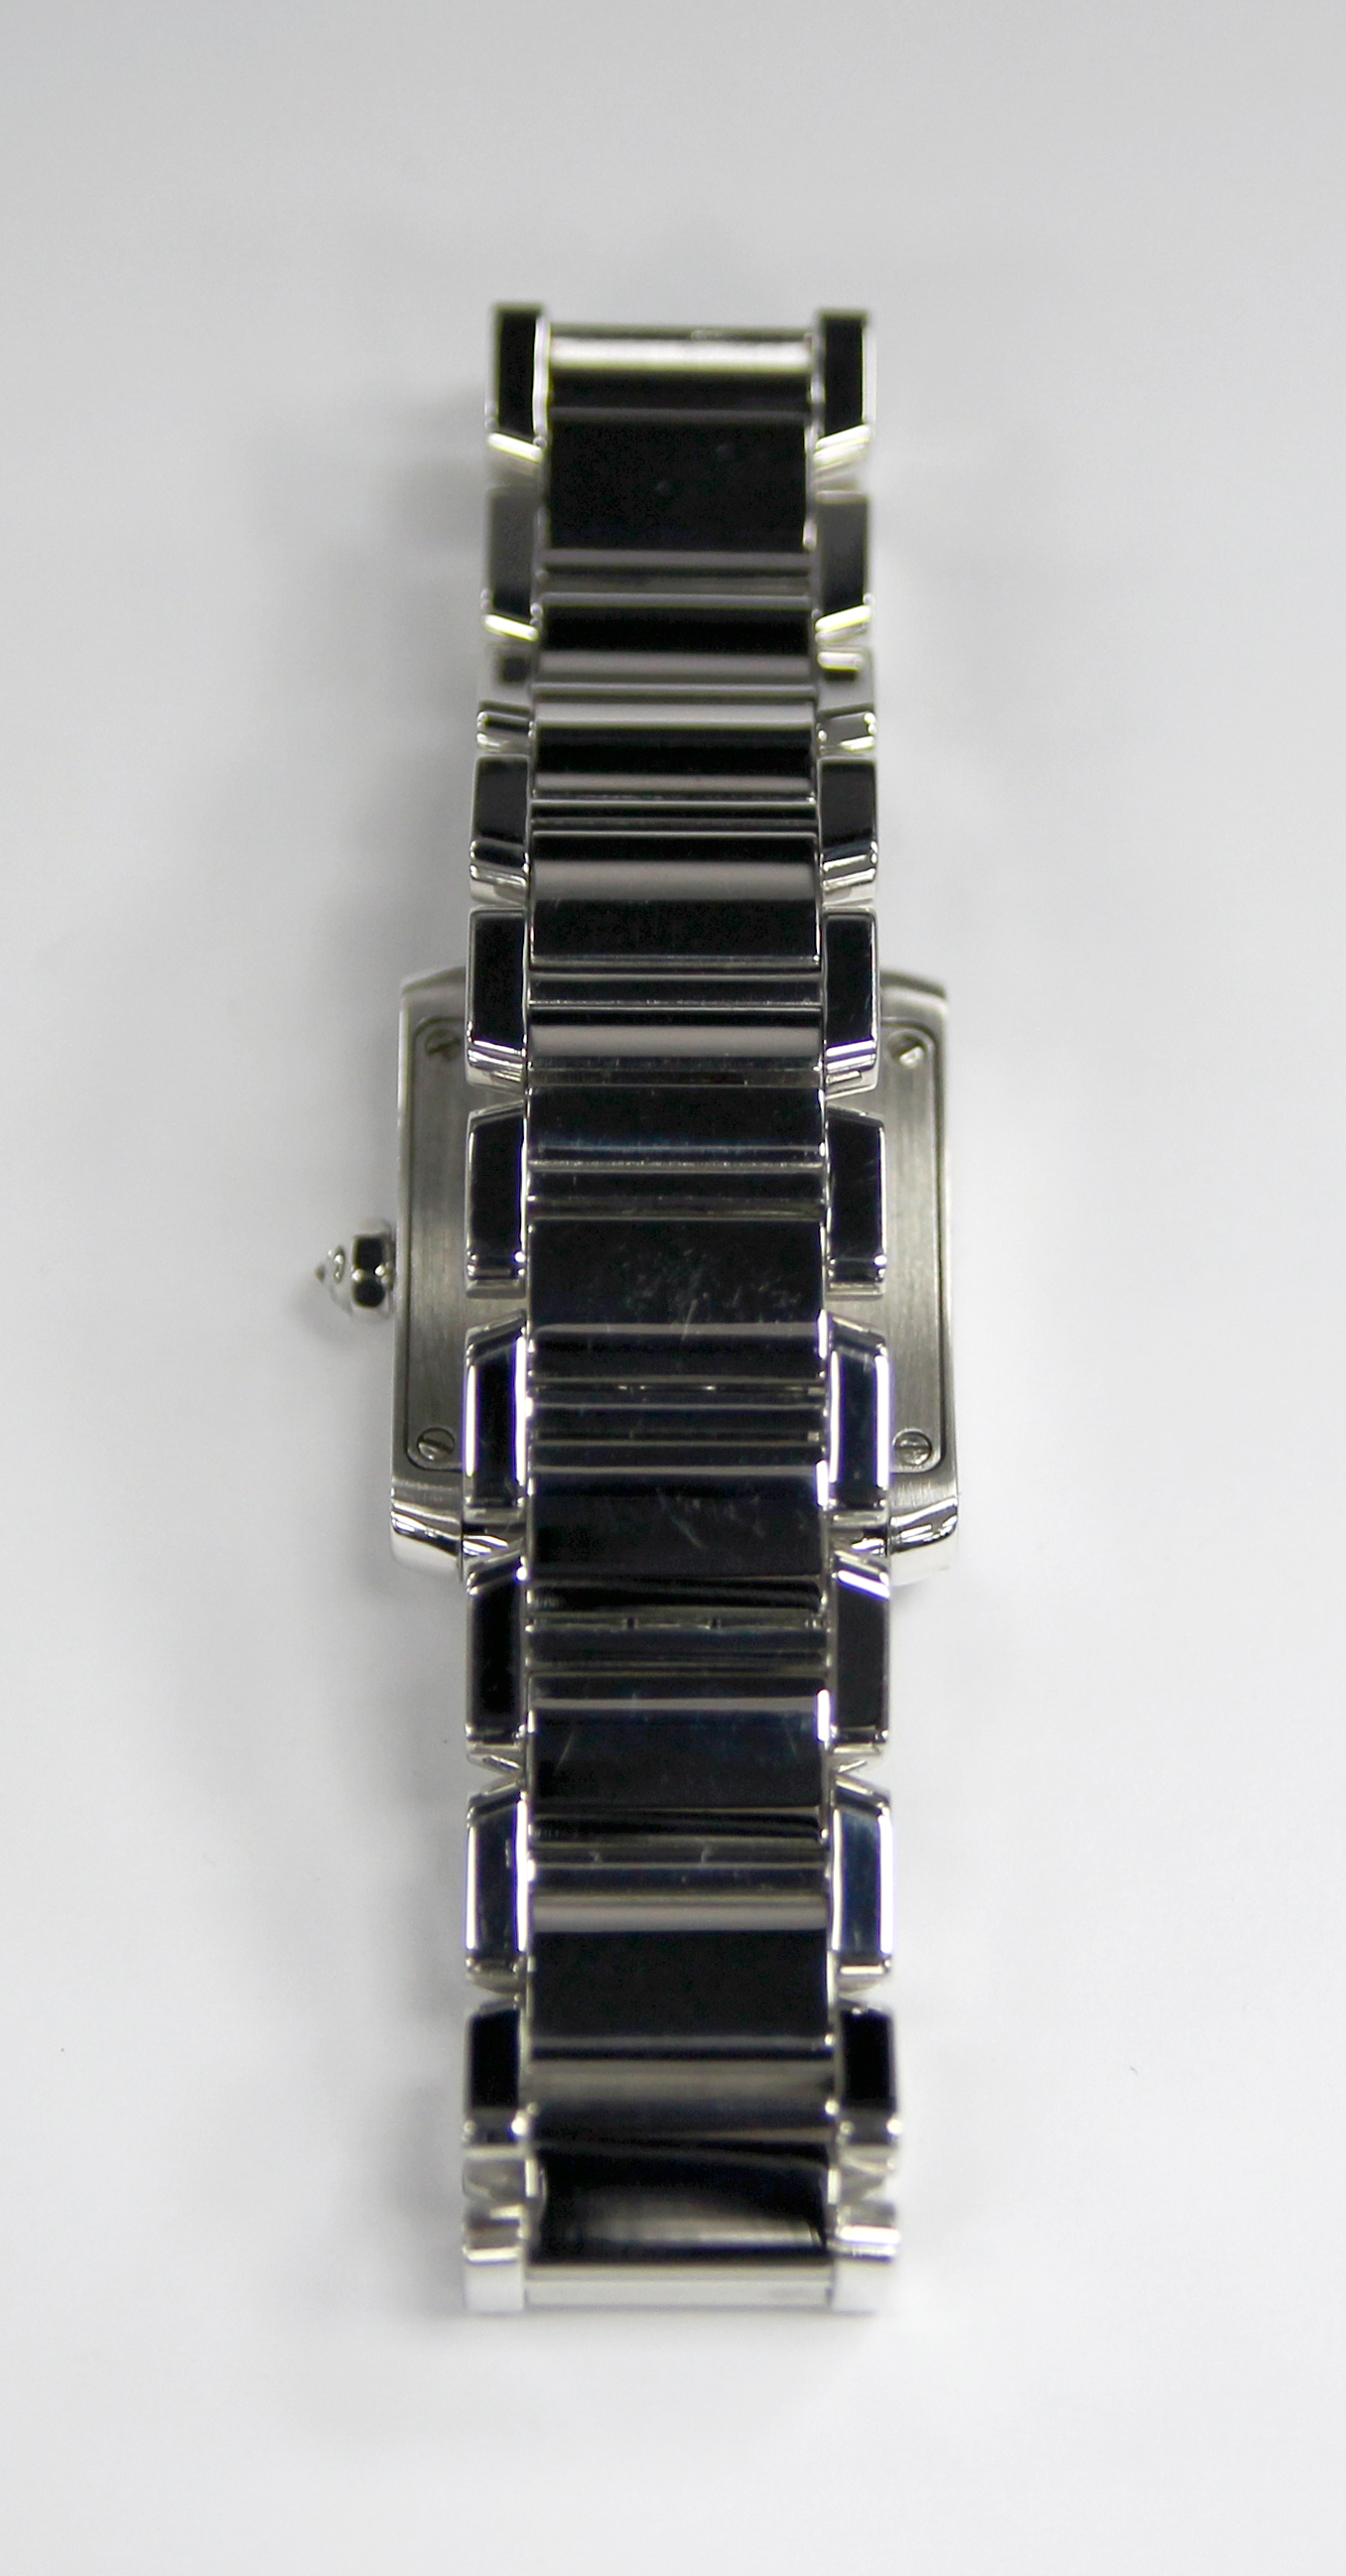 Cartier Tank Franciase lady's wristwatch 2384 in stainless steel case, white dial, - Image 6 of 8